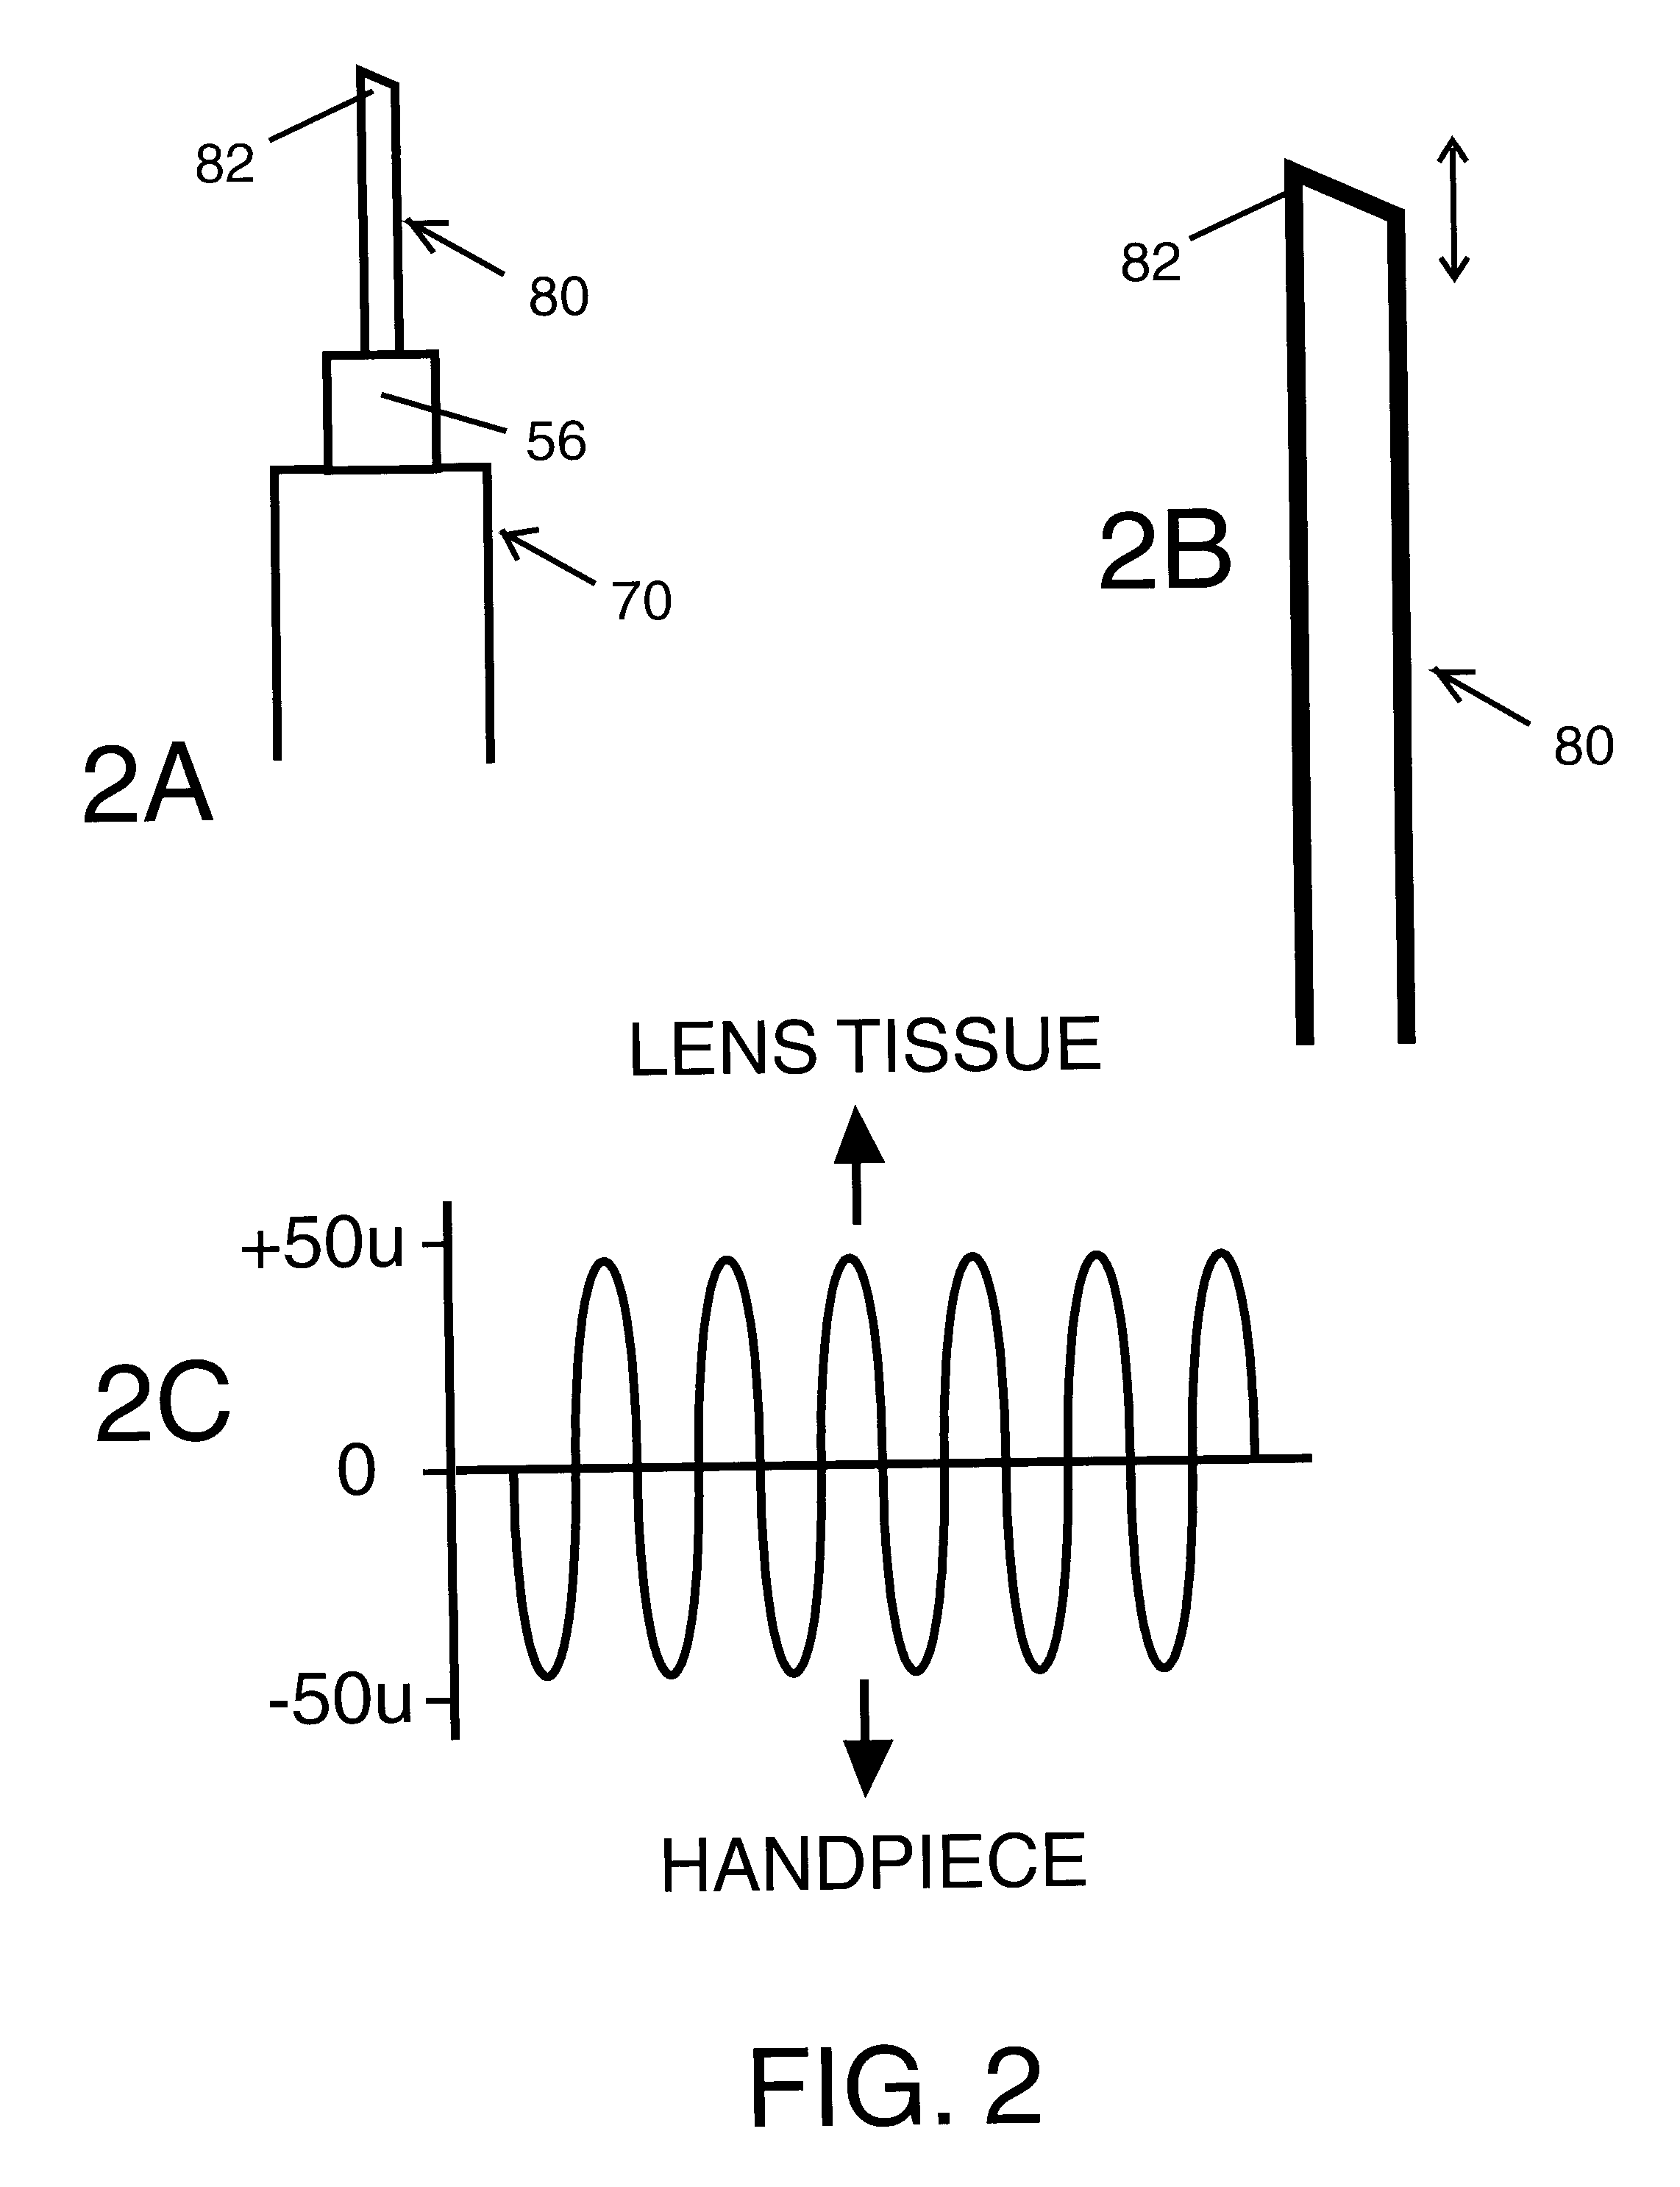 Repetitive progressive axial displacement pattern for phacoemulsifier needle tip